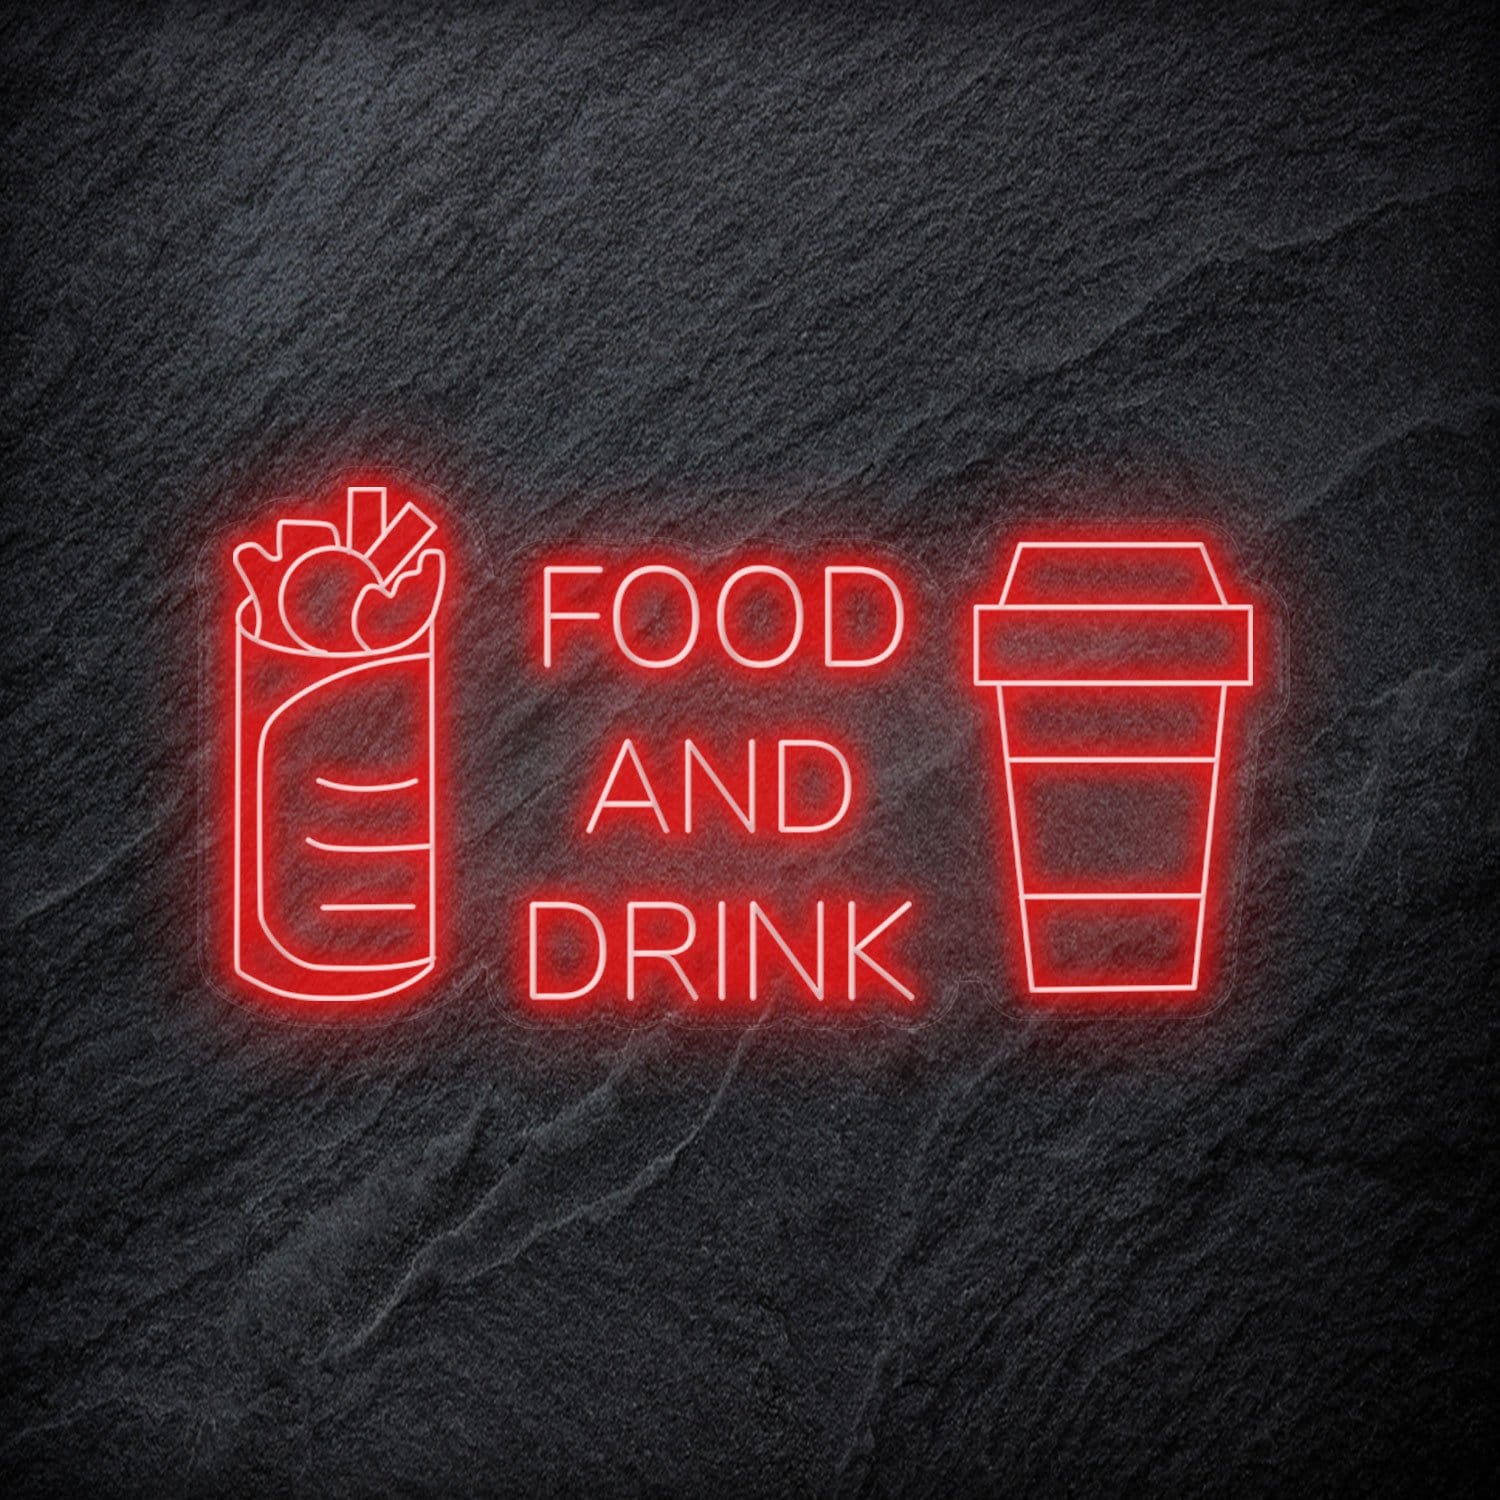 "Food and Drink" LED Neonschild - NEONEVERGLOW